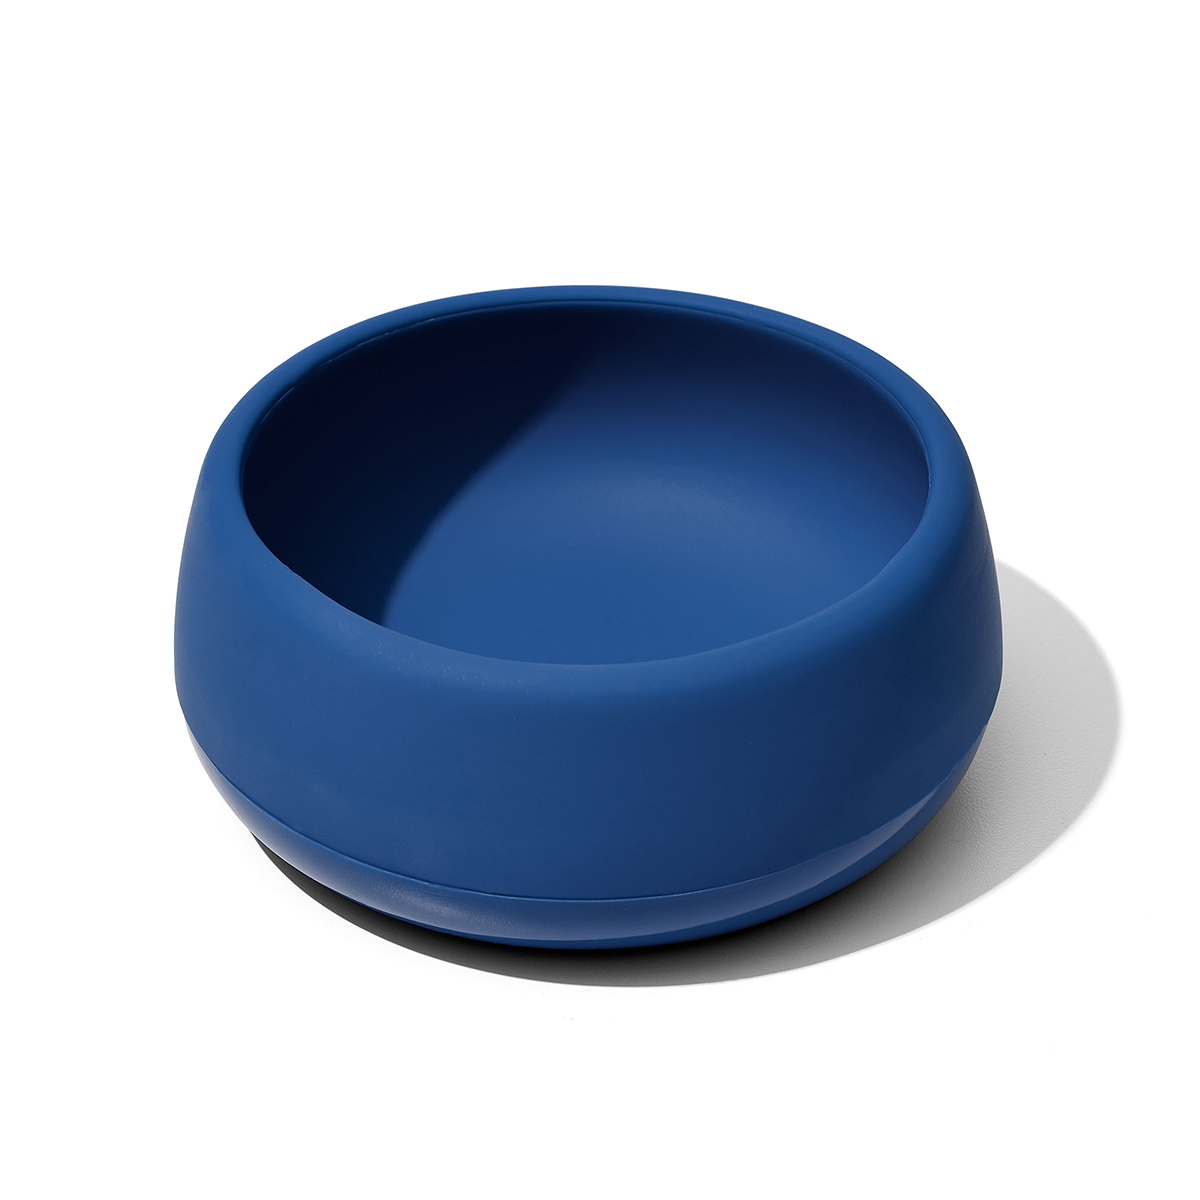 OXO Tot Silicone Bowl - Teal